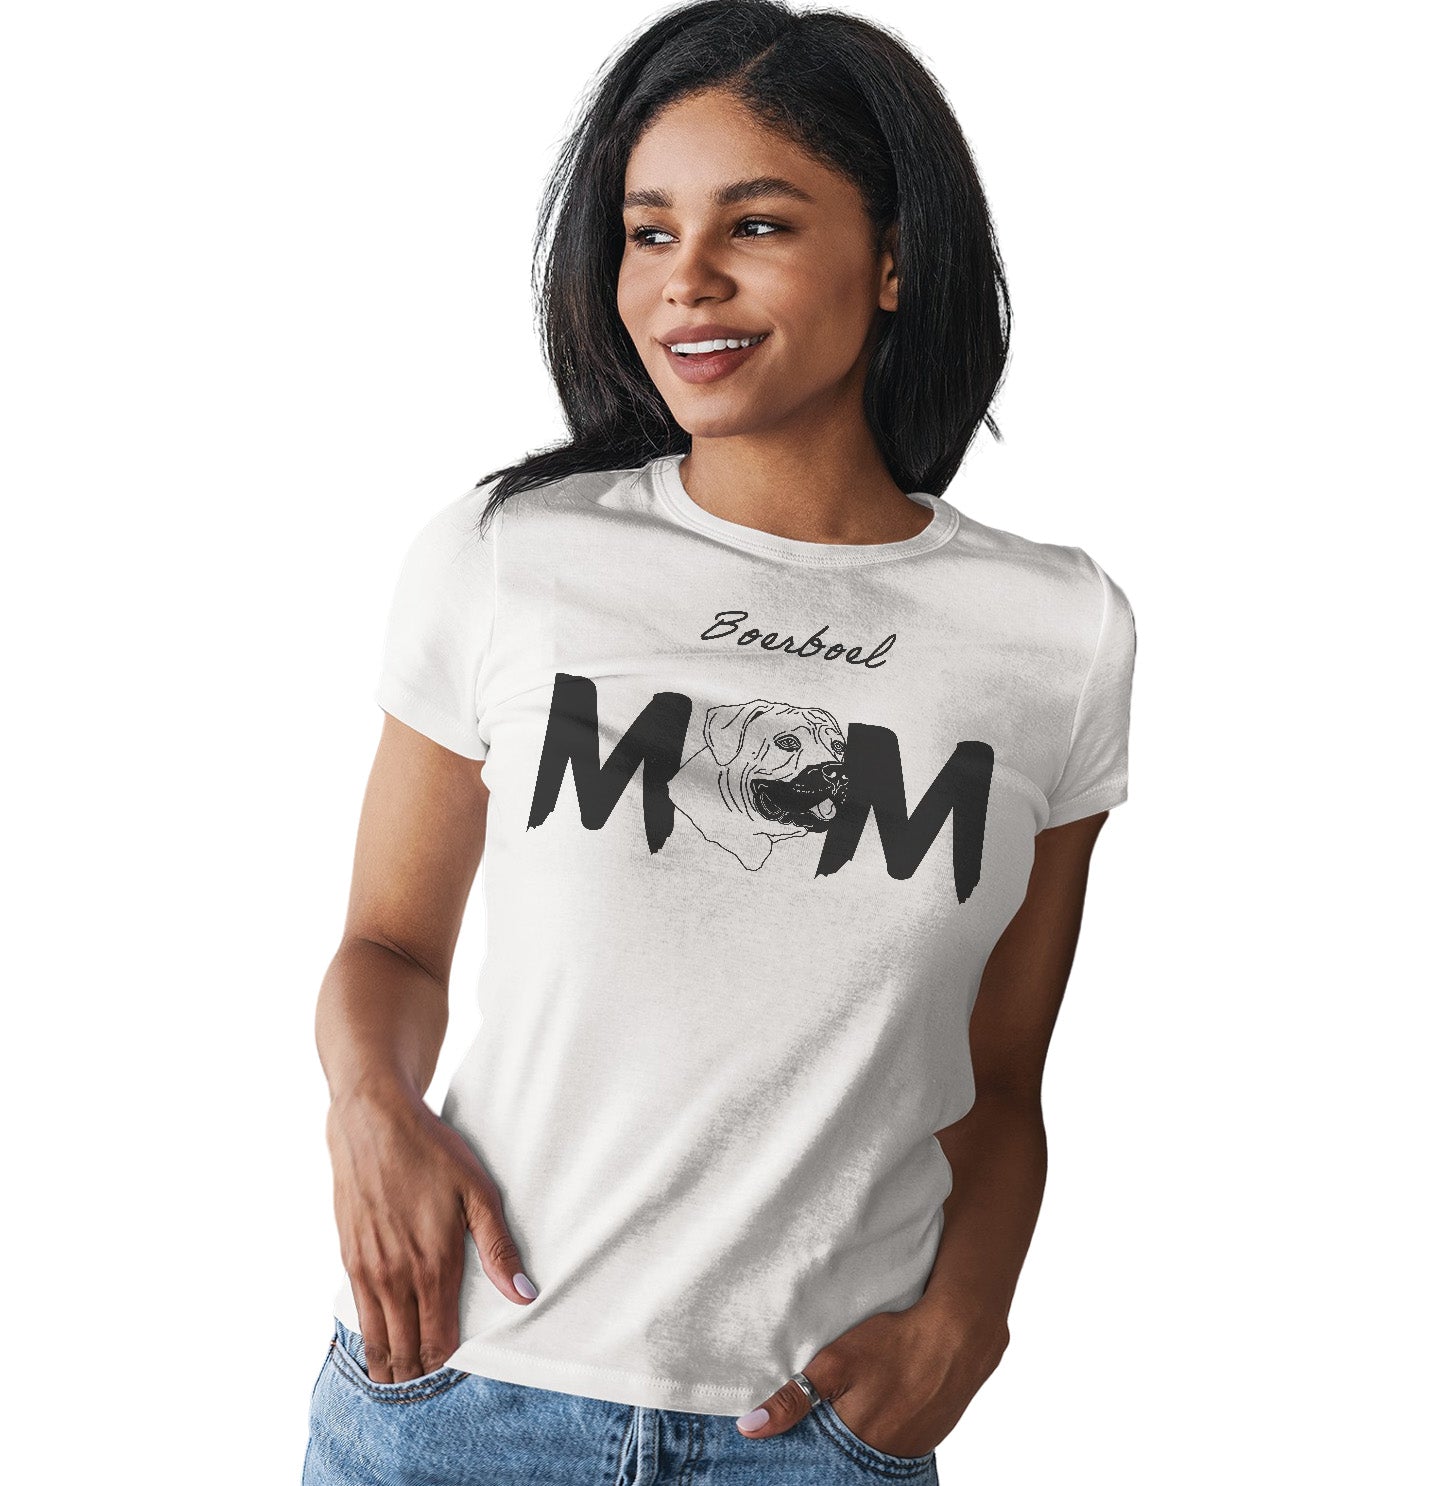 Boerboel Breed Mom - Women's Fitted T-Shirt